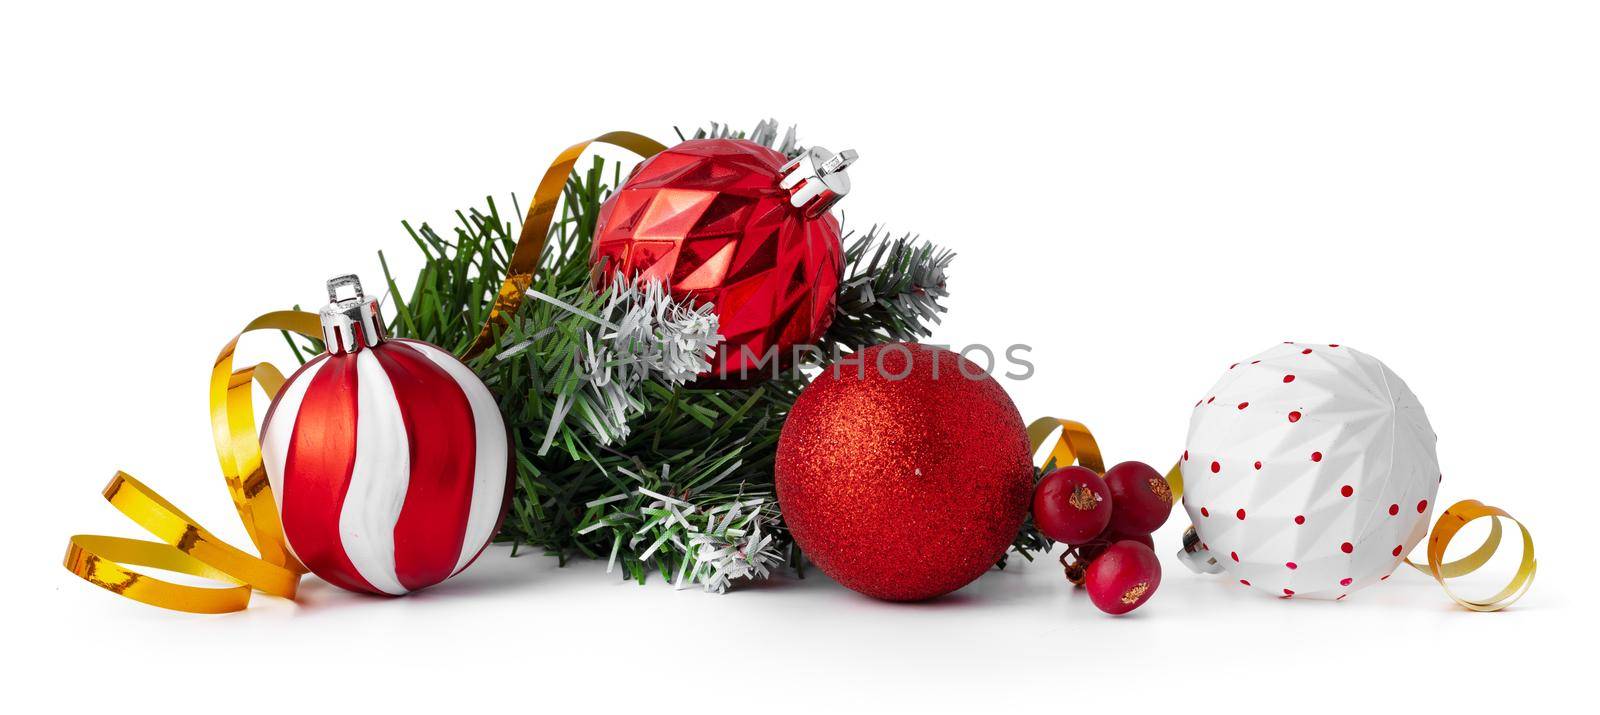 Christmas tree branch with Christmas baubles isolated on white background by Fabrikasimf